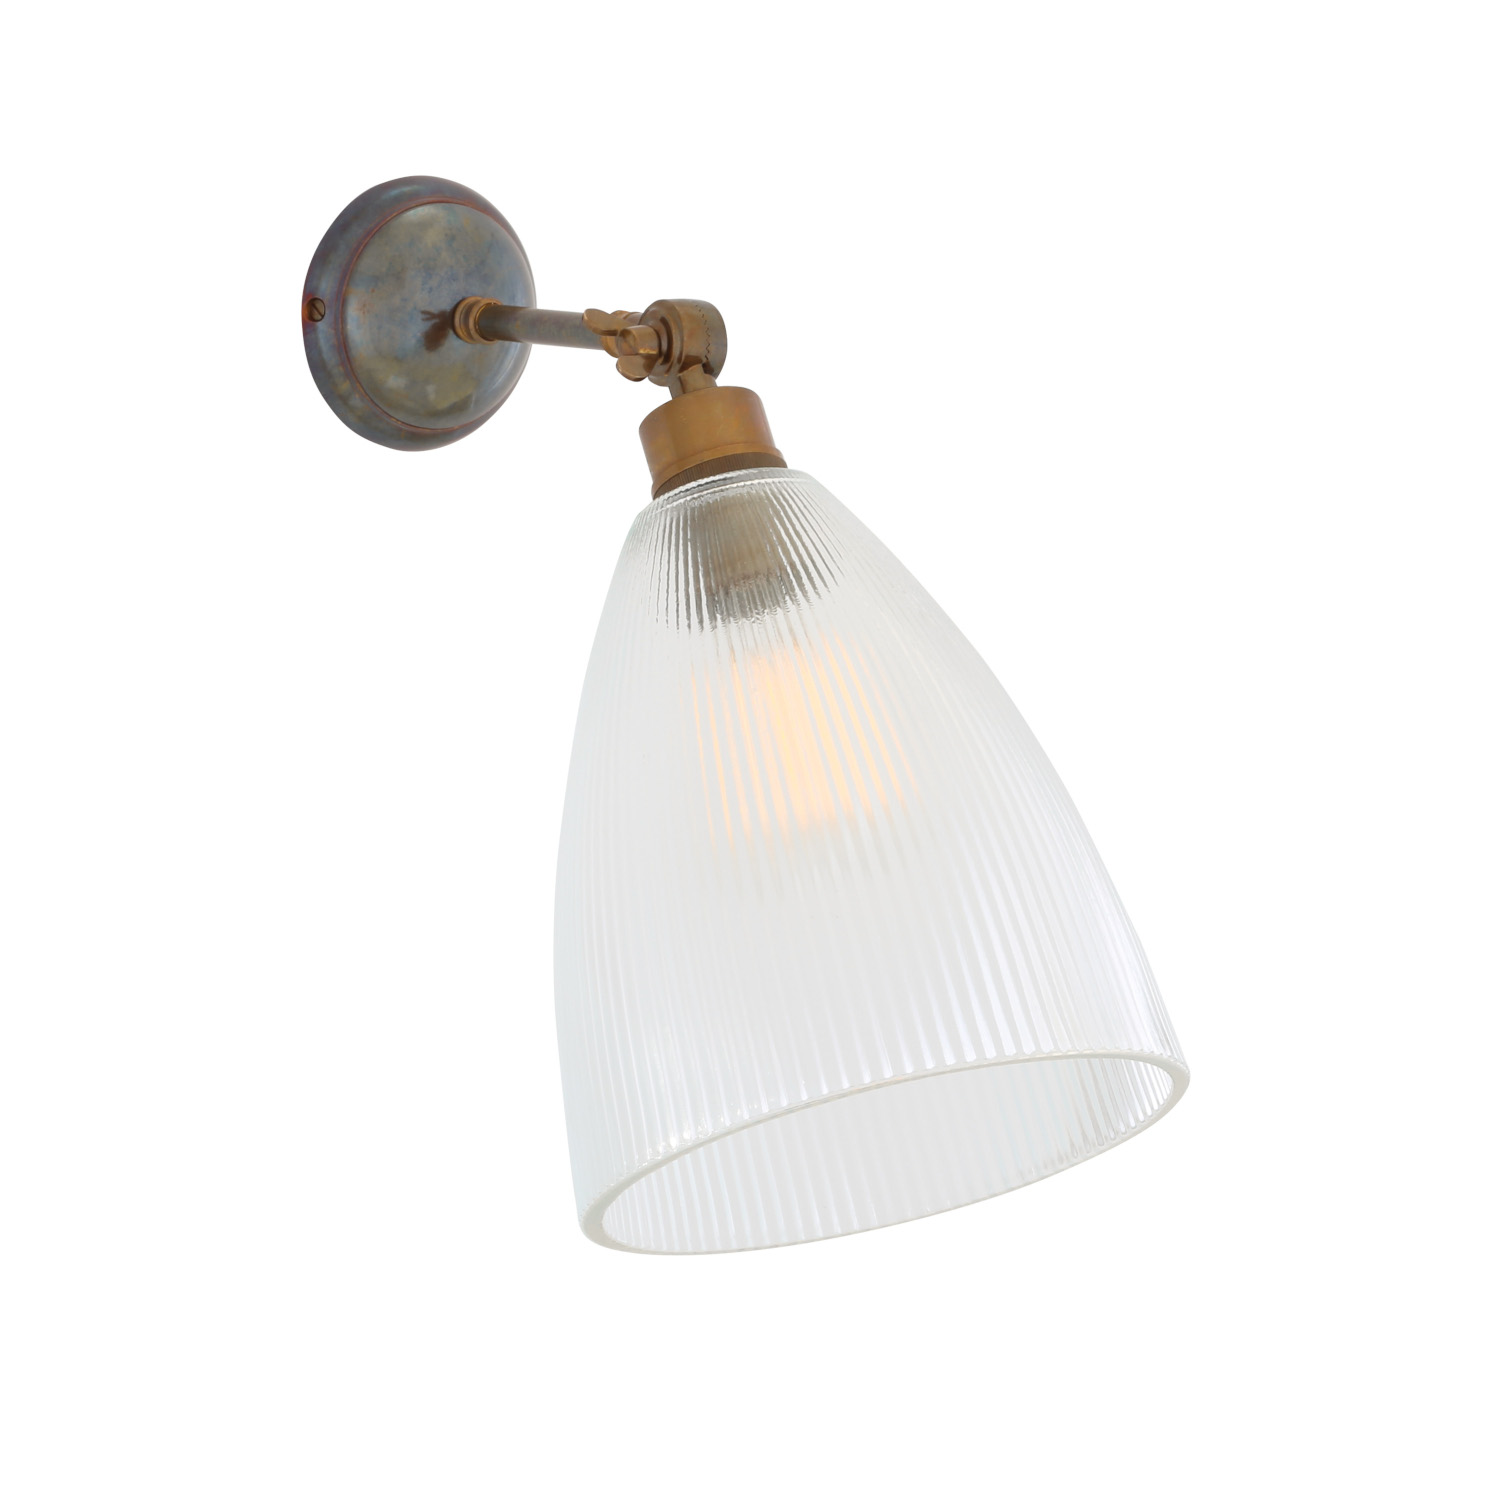 Wall light with joint and large prismatic glass: Alt-Messing patiniert